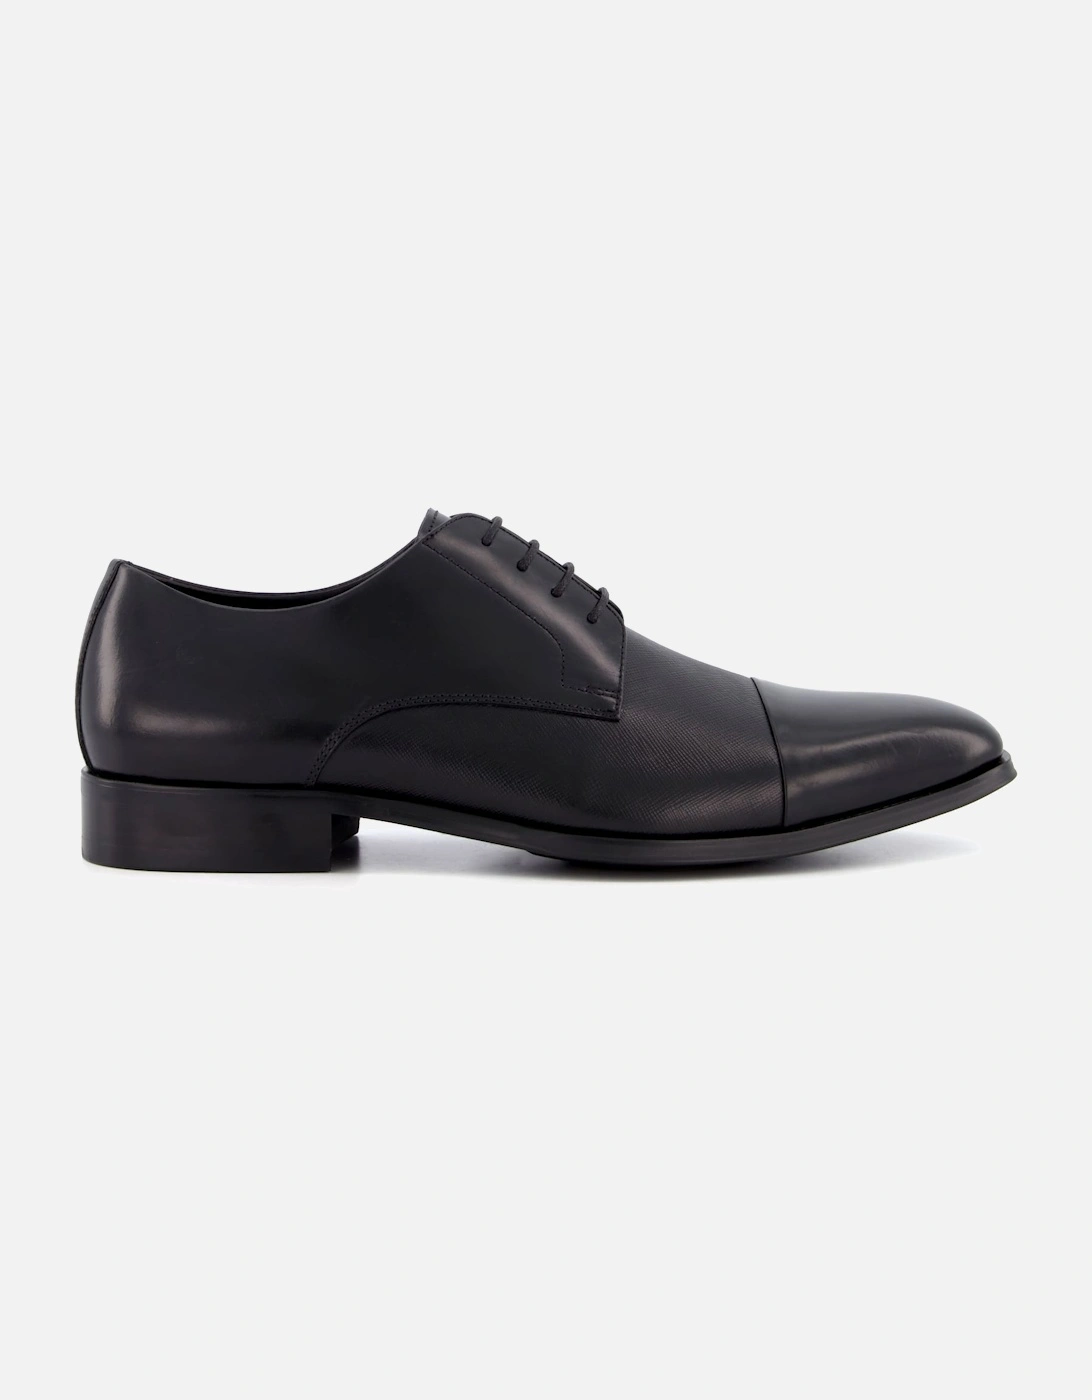 Mens Sheet - Saffiano Leather Oxford Shoes